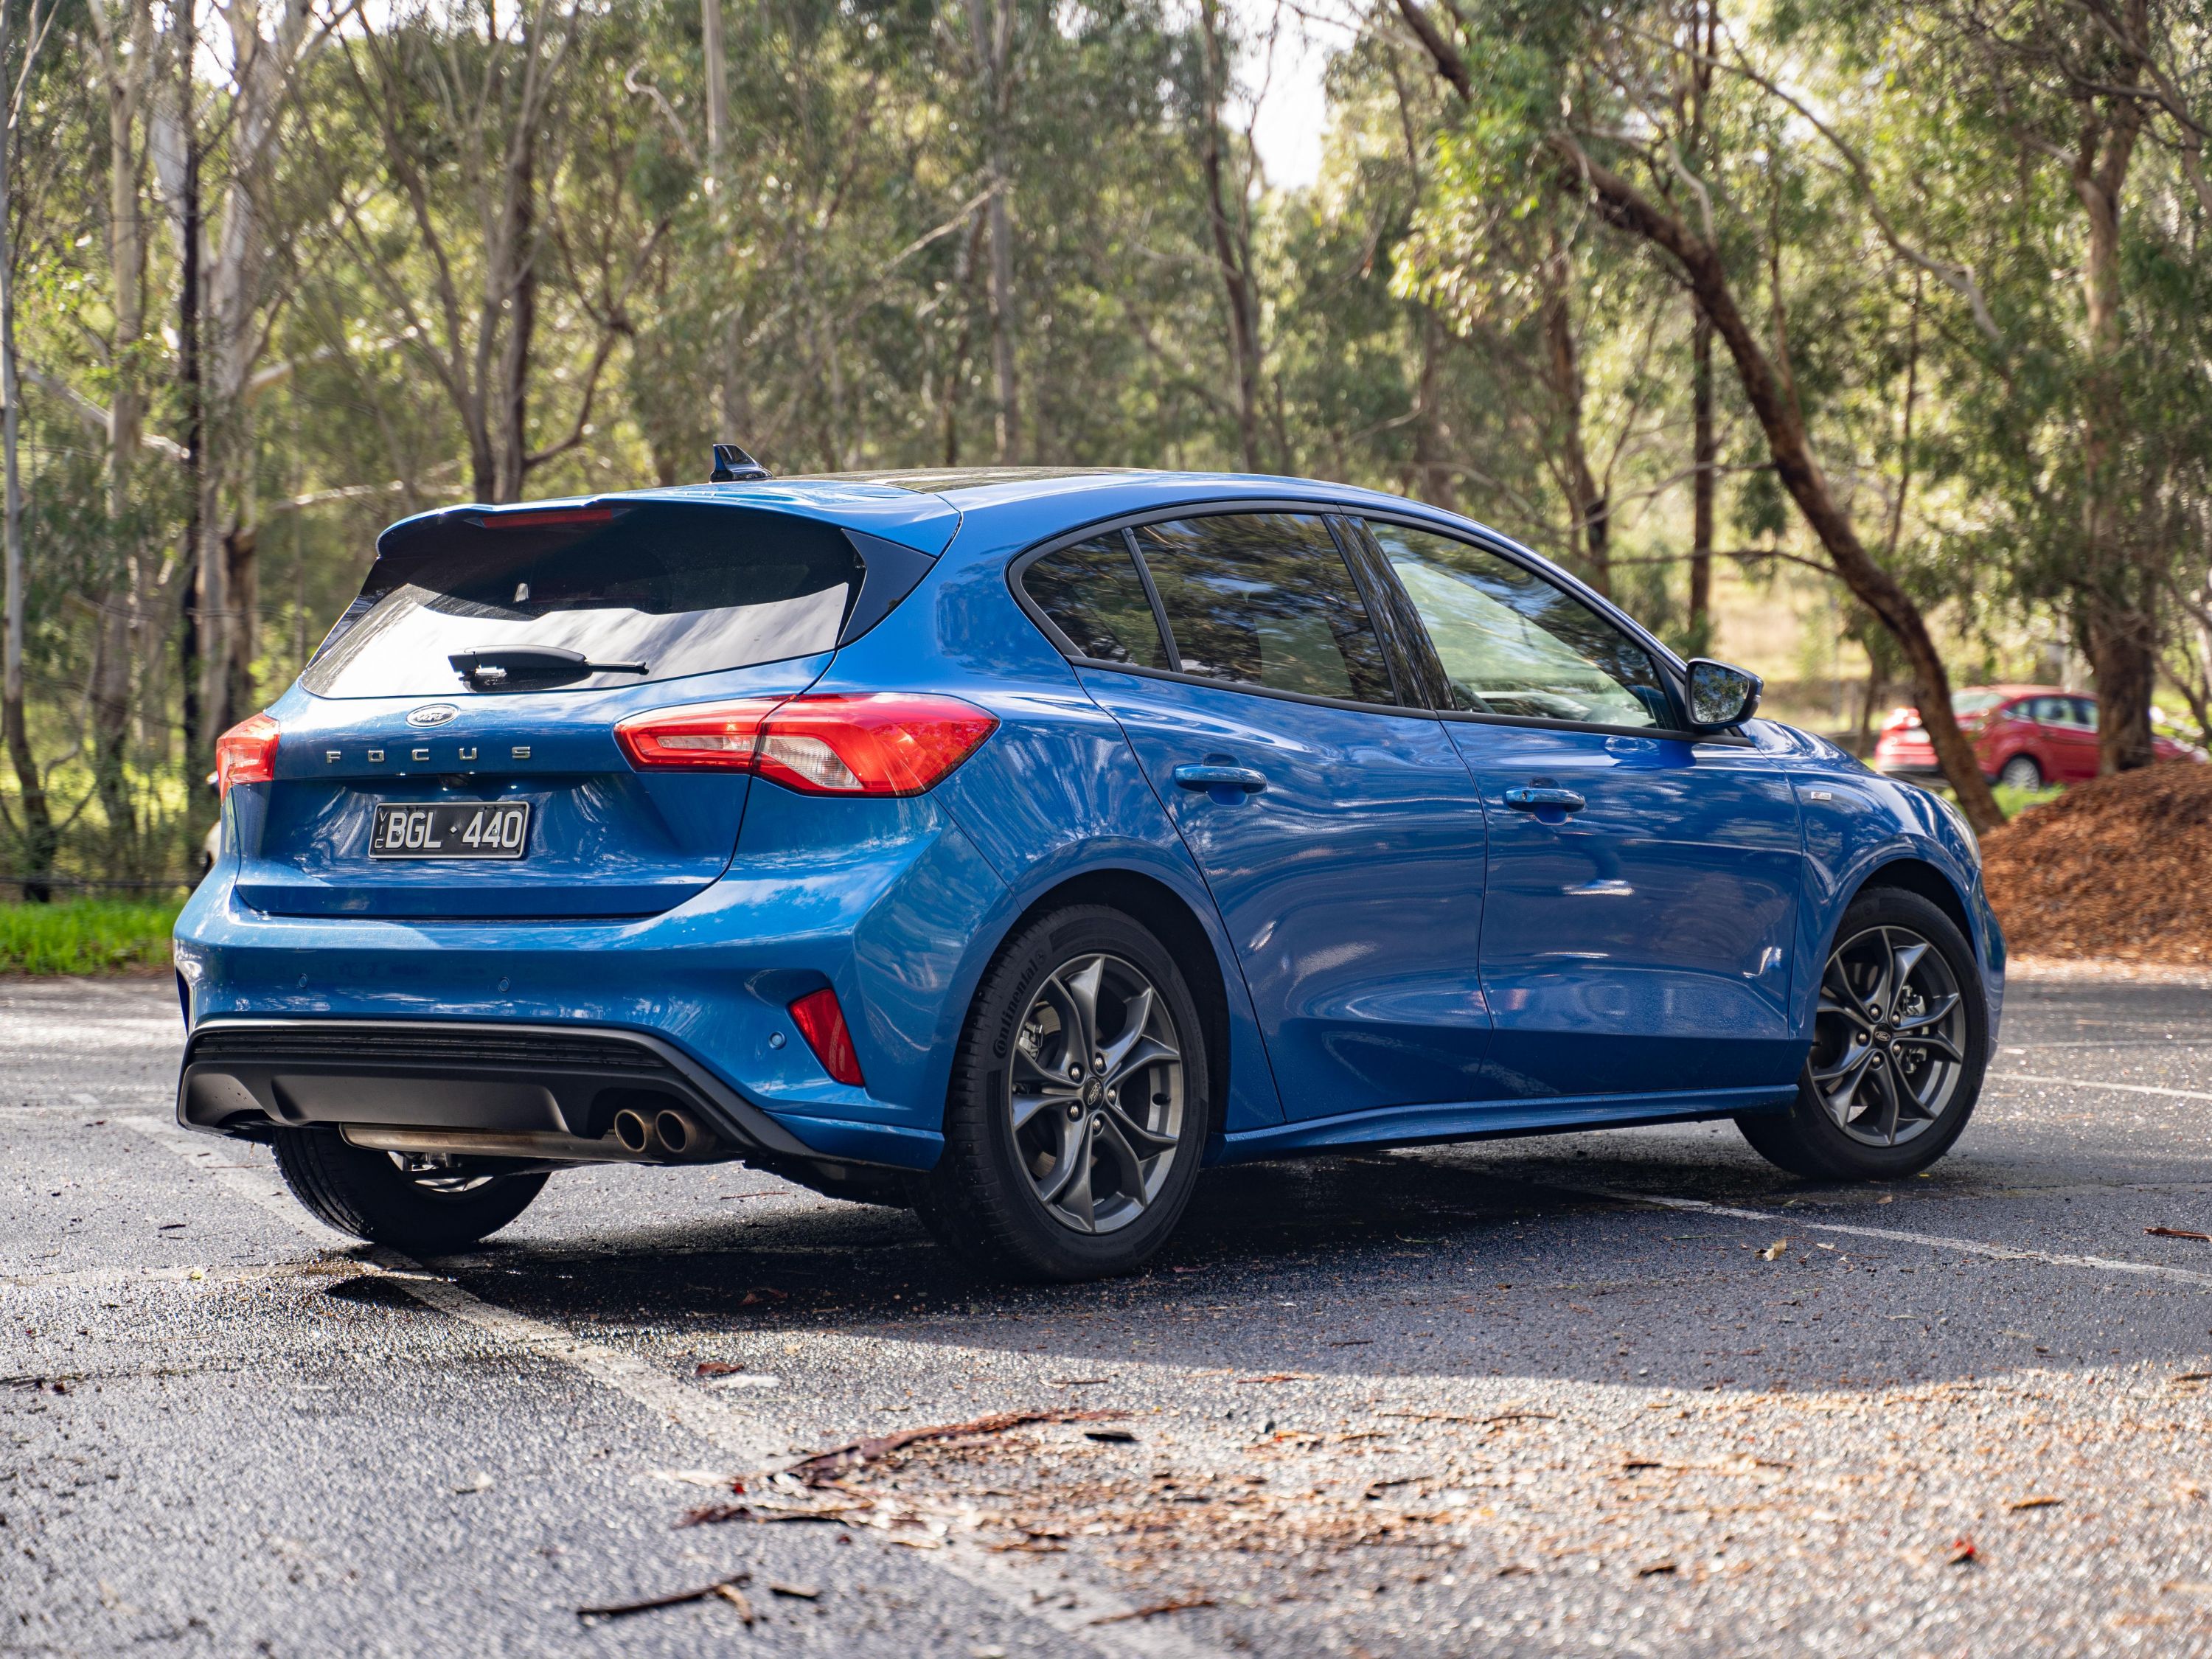 New Ford Focus 2021: mild updates inside and out